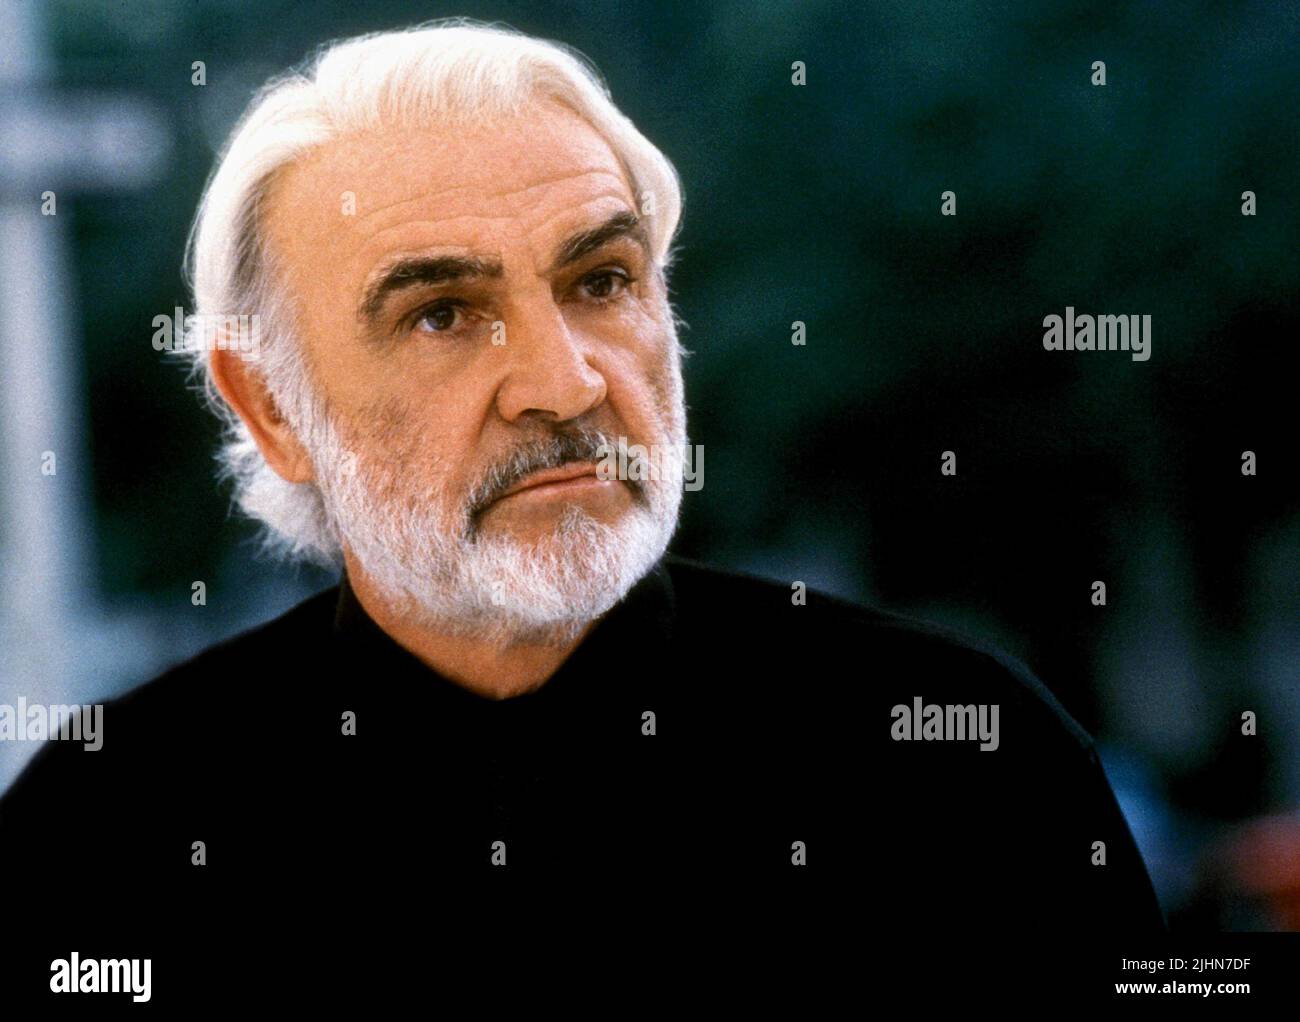 SEAN CONNERY, FINDING FORRESTER, 2000 Stock Photo